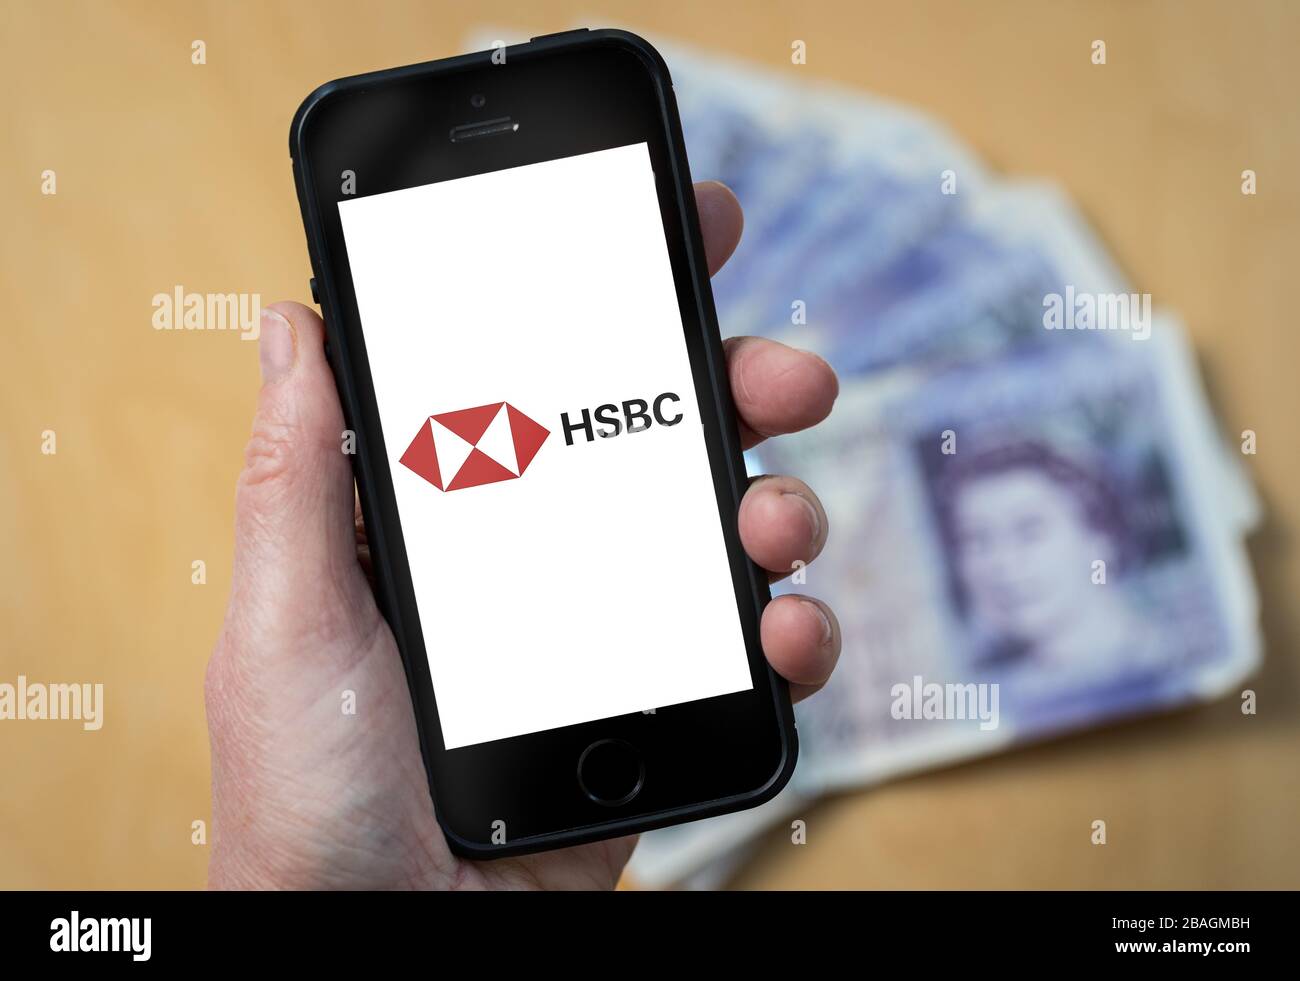 A woman looking at the HSBC Bank logo on a mobile phone. (editorial Use Only) Stock Photo